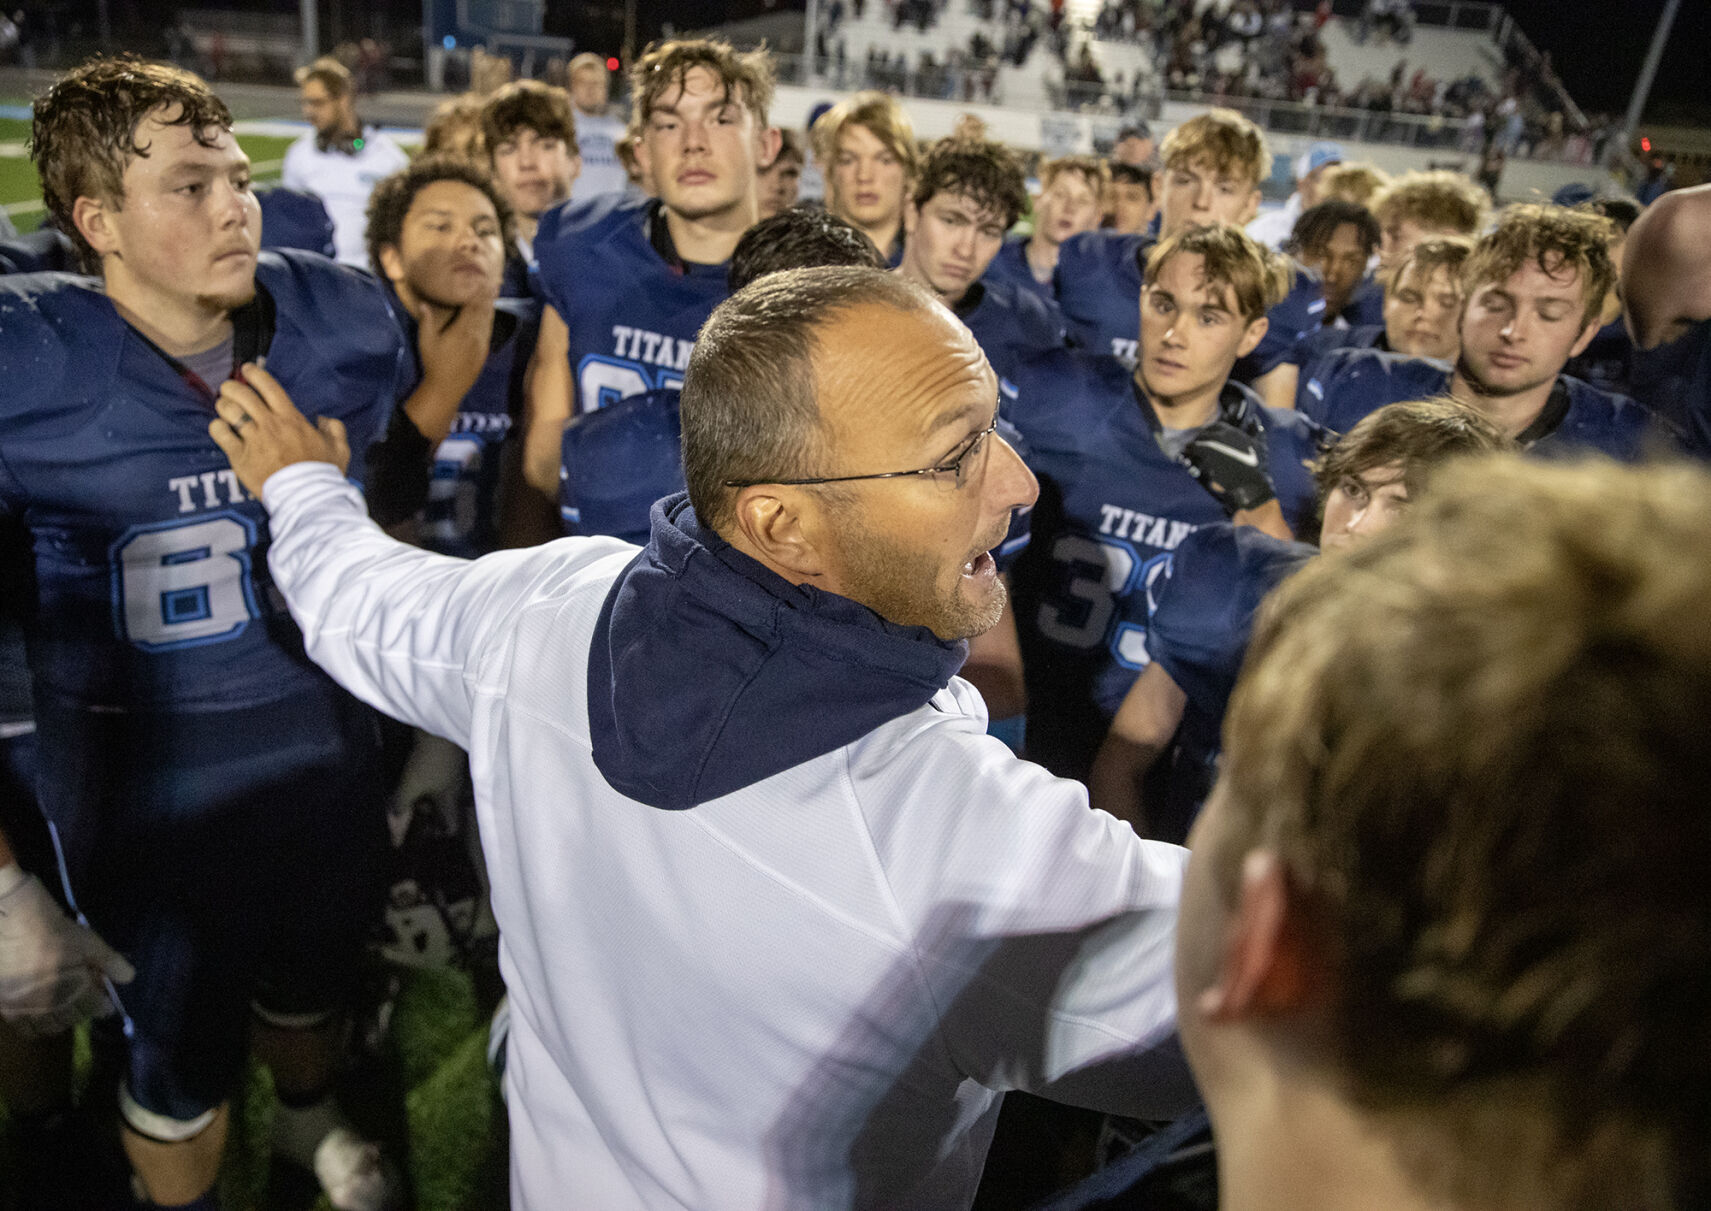 Lewis Central’s Kammrad named IFCA 4A Regional Coach of the Year